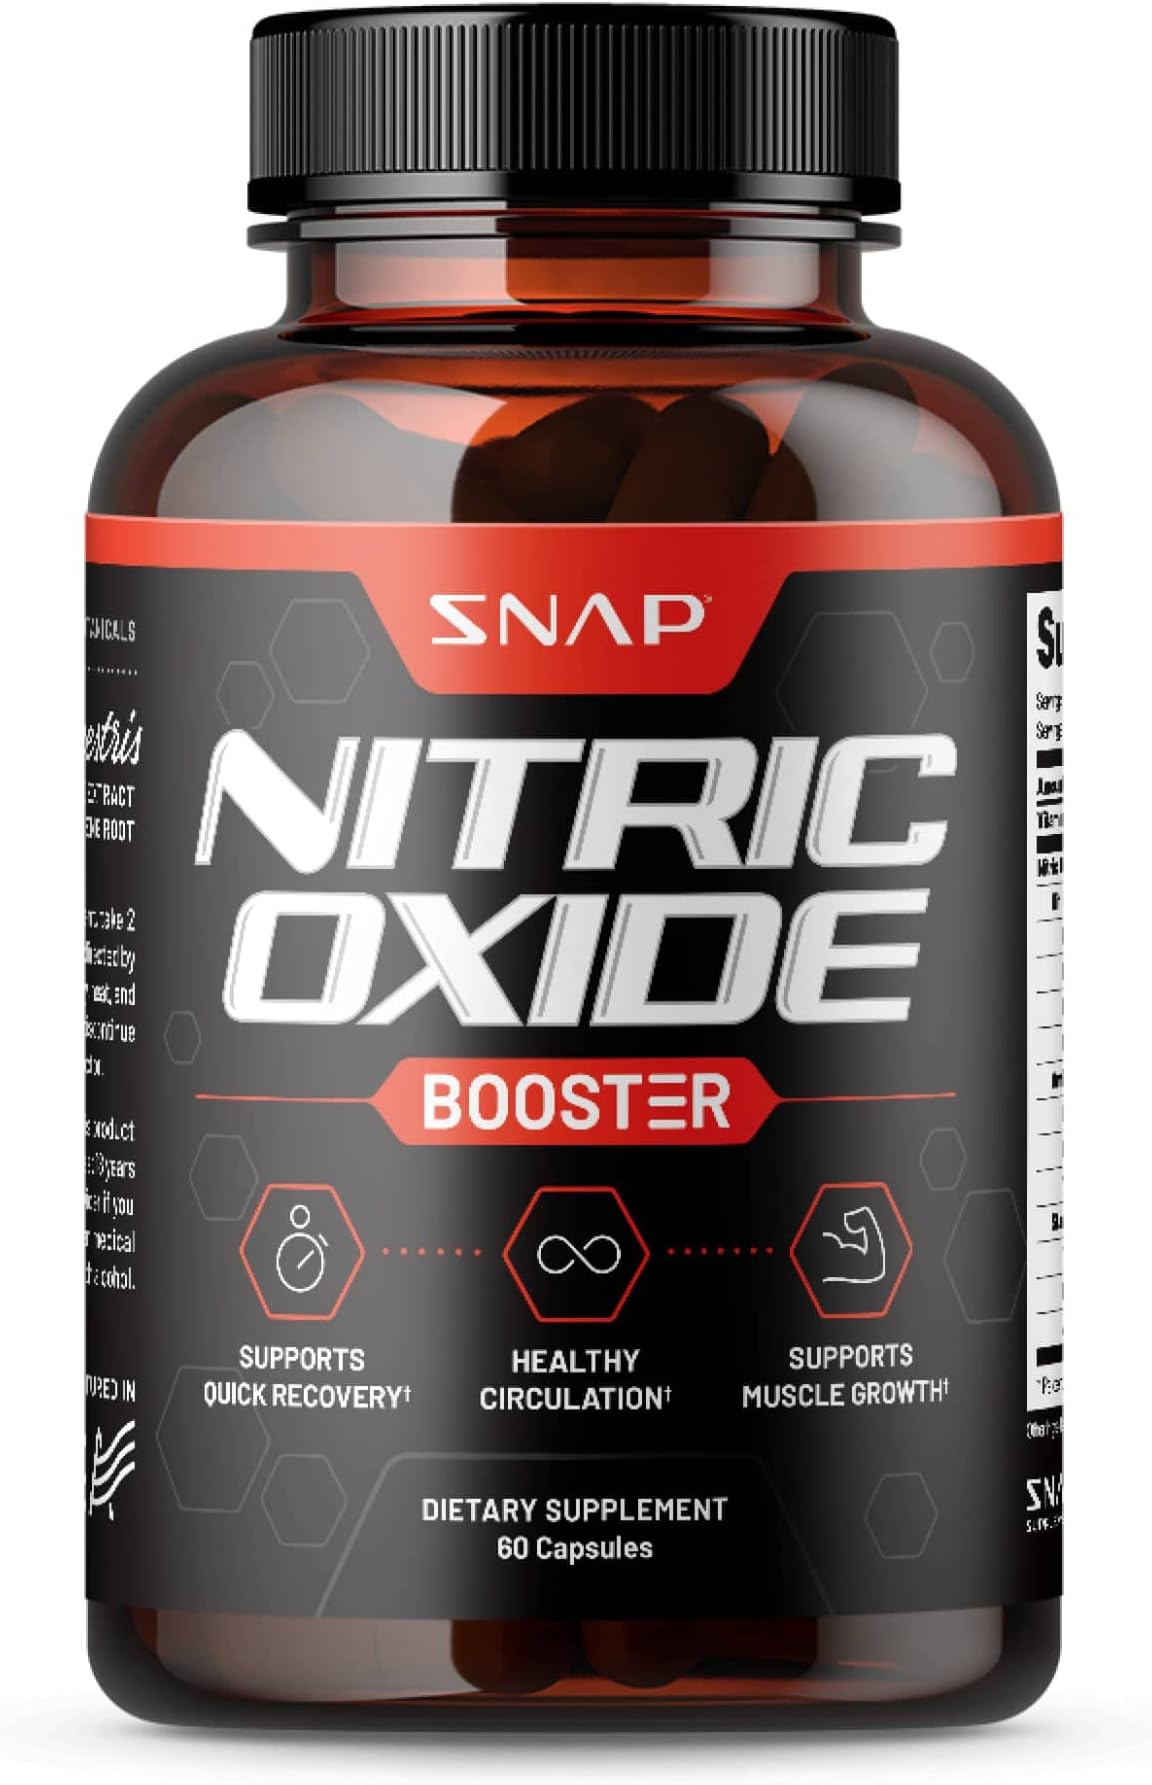 Nitric Oxide Booster-Improves Blood Flow & Heart Health - All Natural Supplement - 60 Count